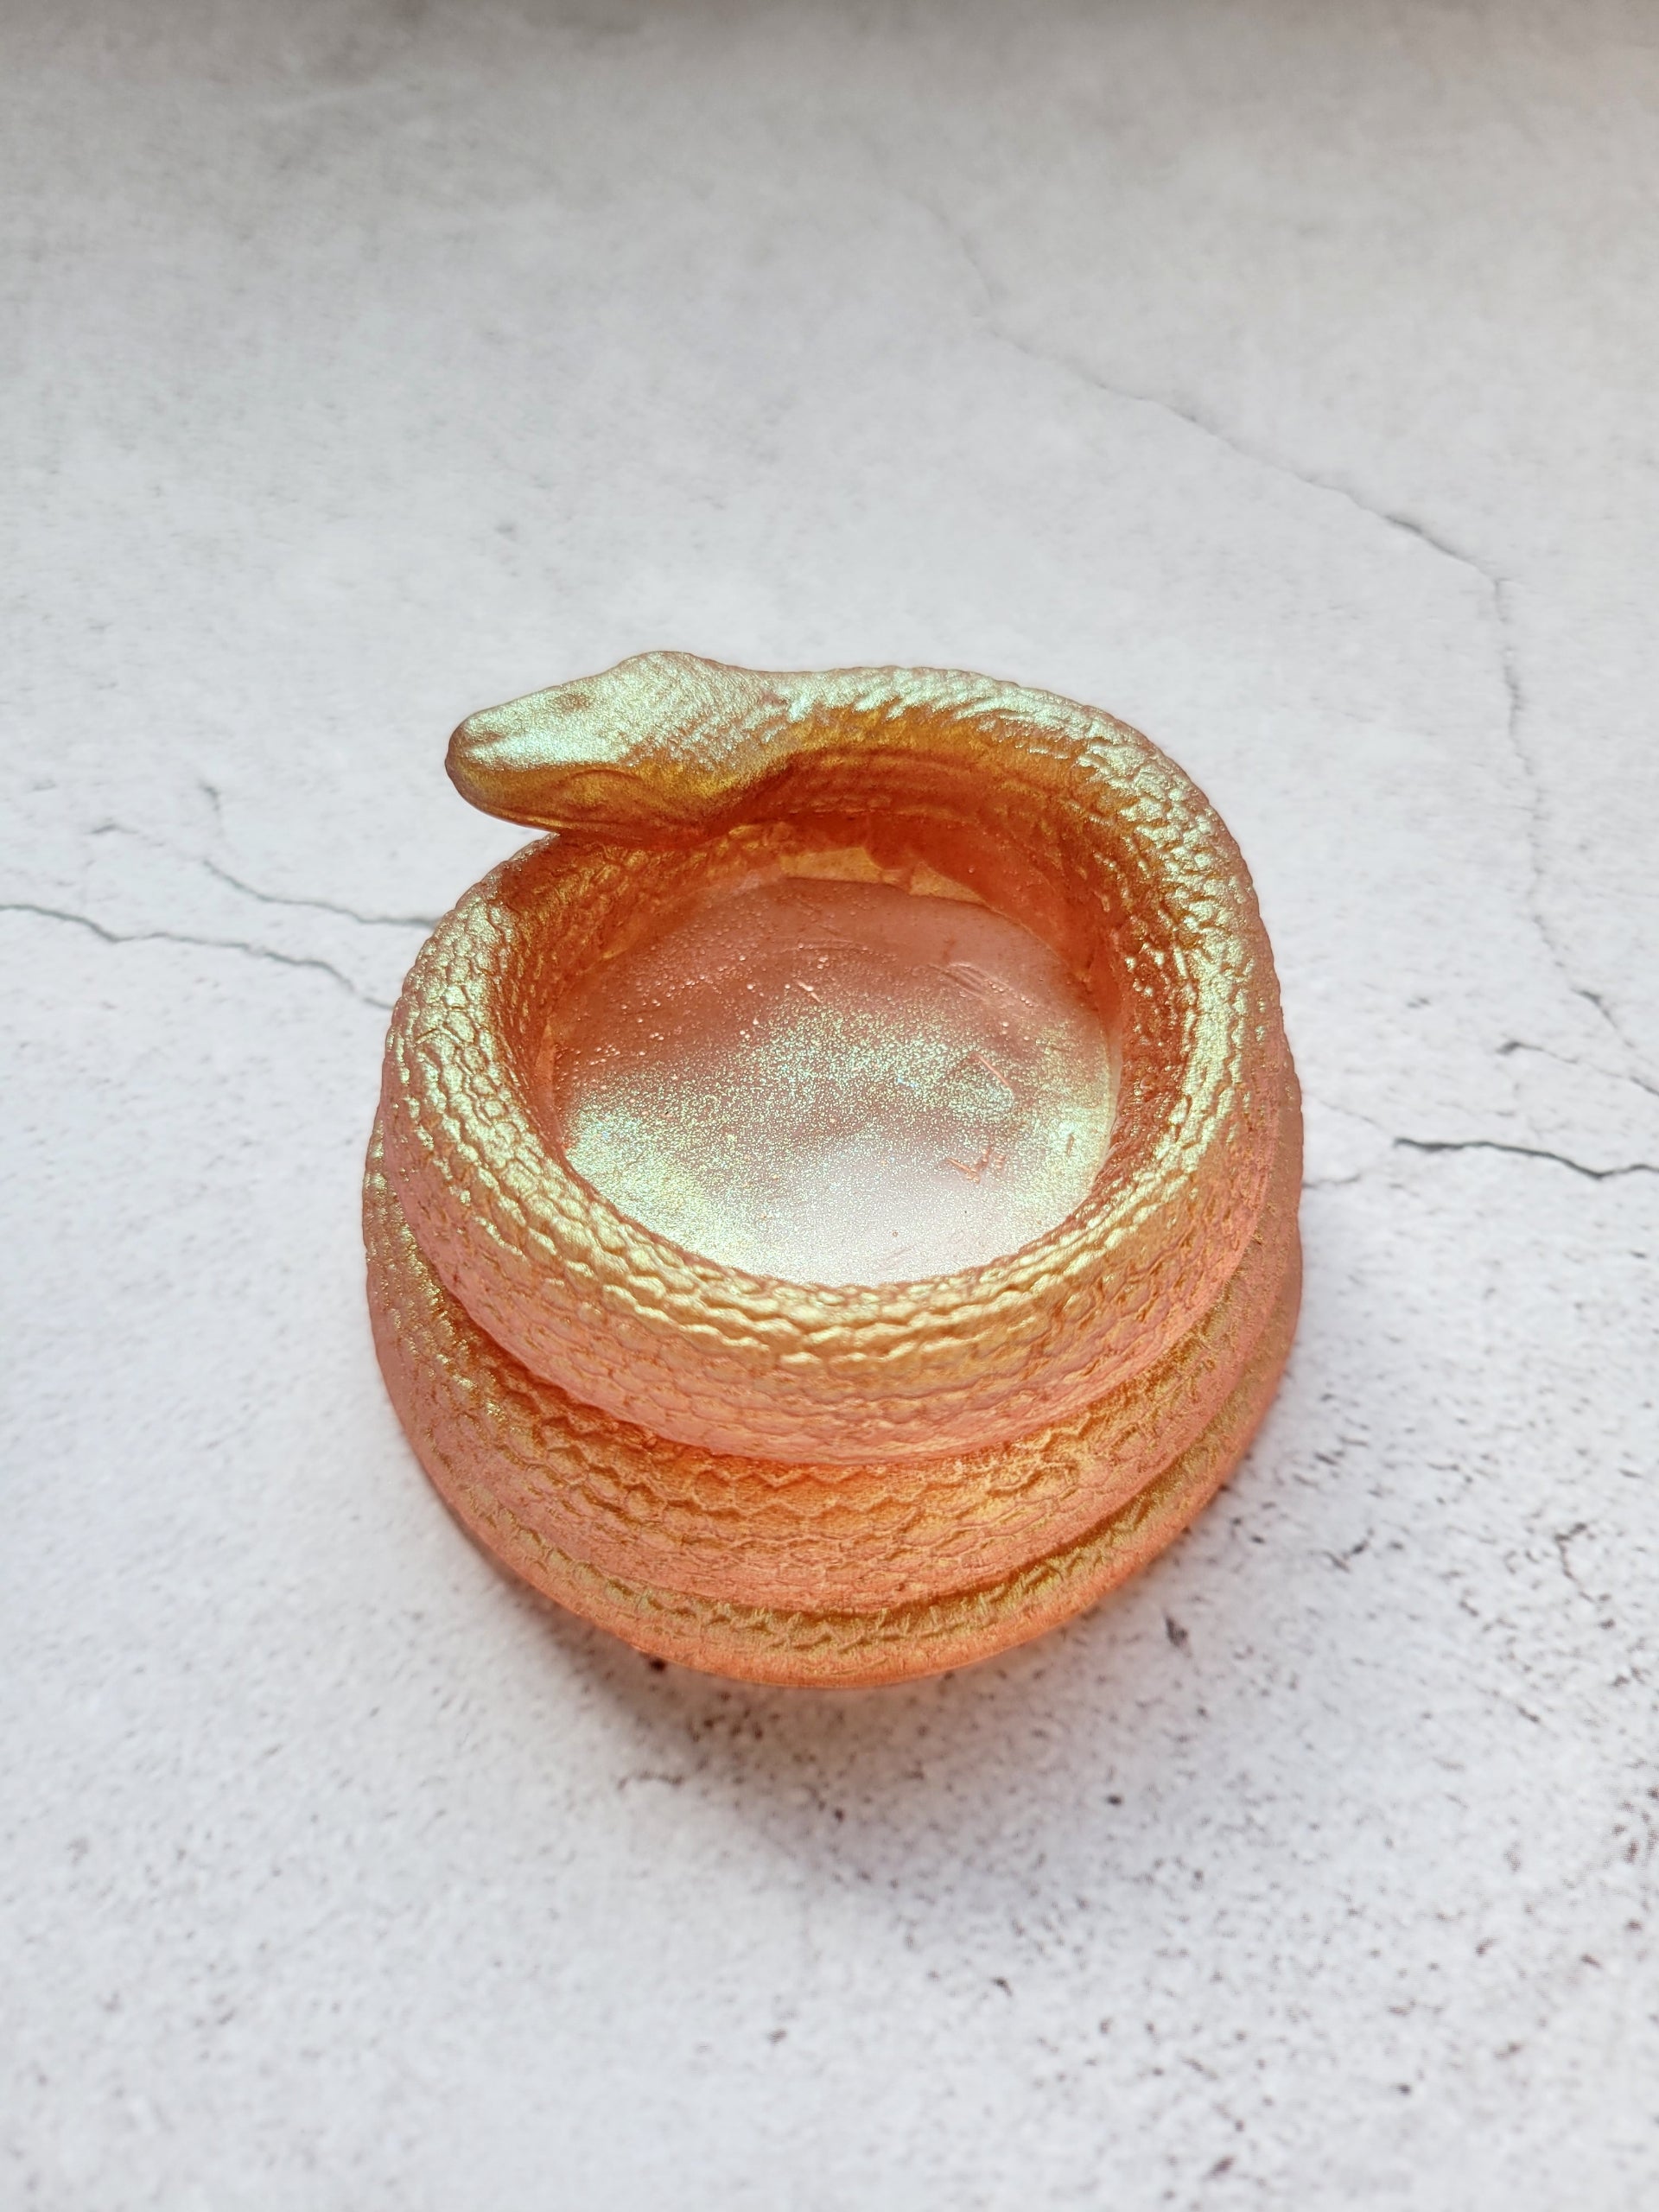 A side view of a tealight candle holder in the style of a coiled snake. It's a shimmering gold color.